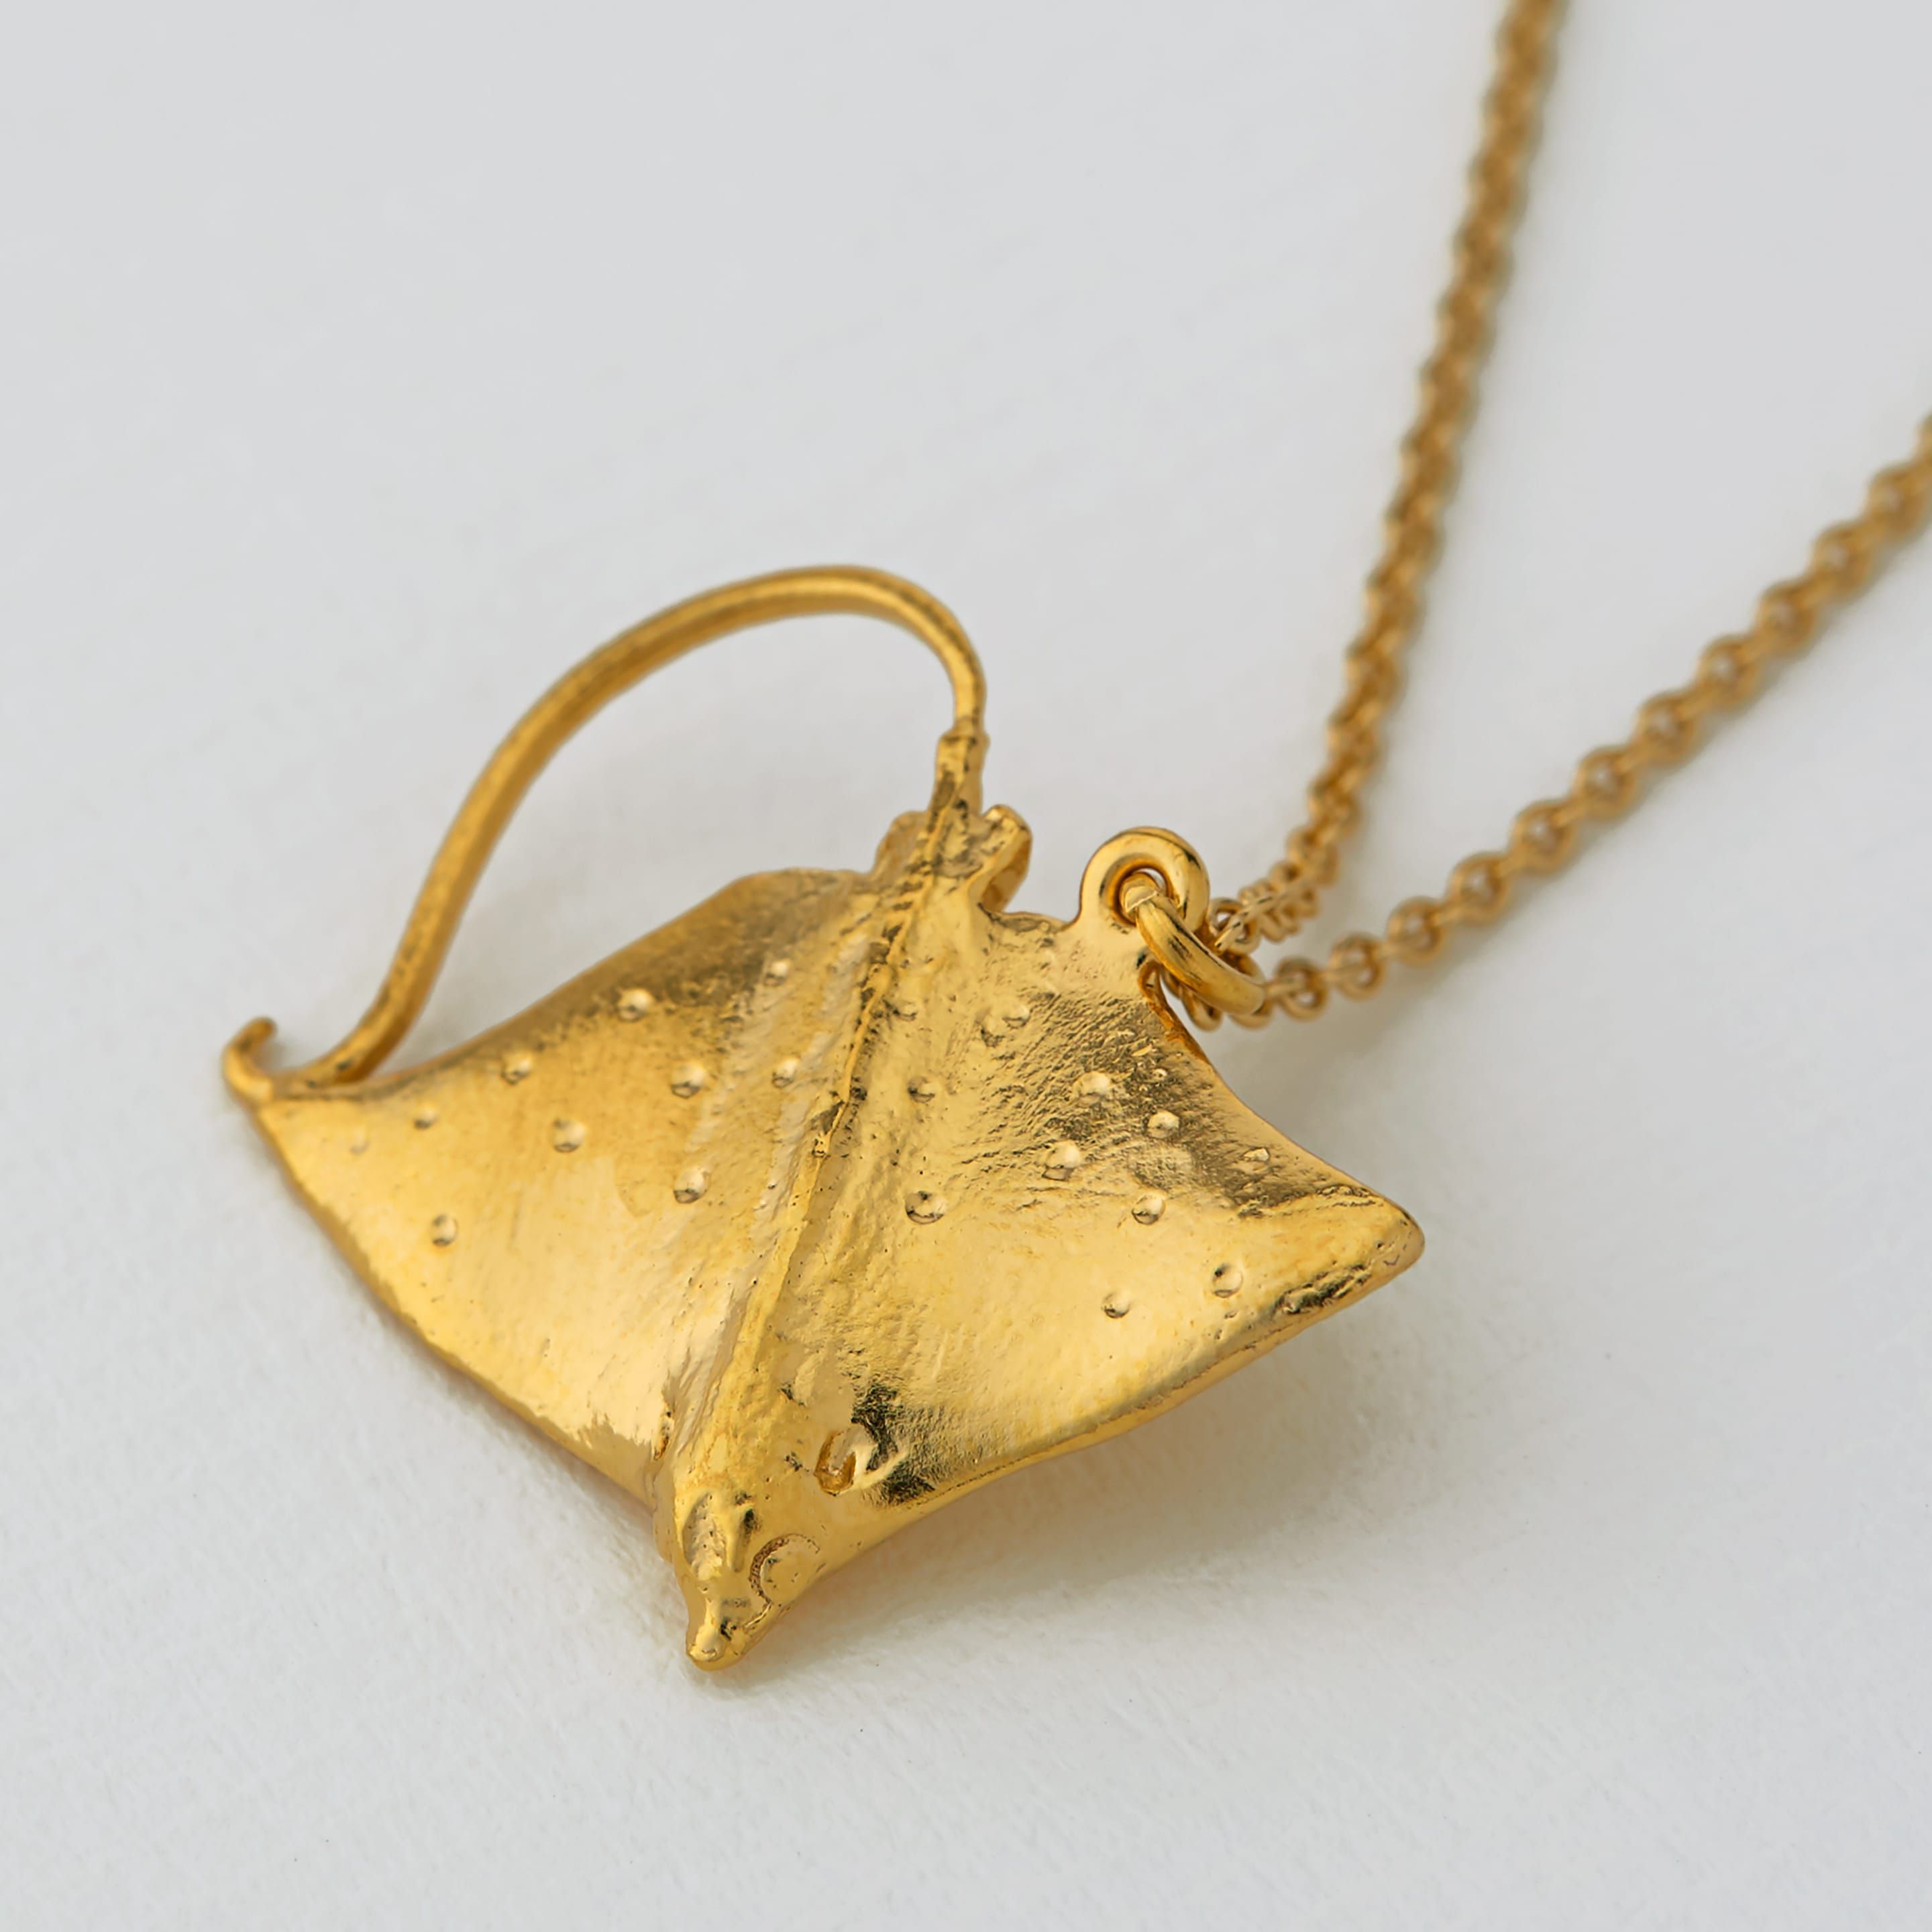 Details about   14K Yellow Gold Stingray Charm Pendant MSRP $343 